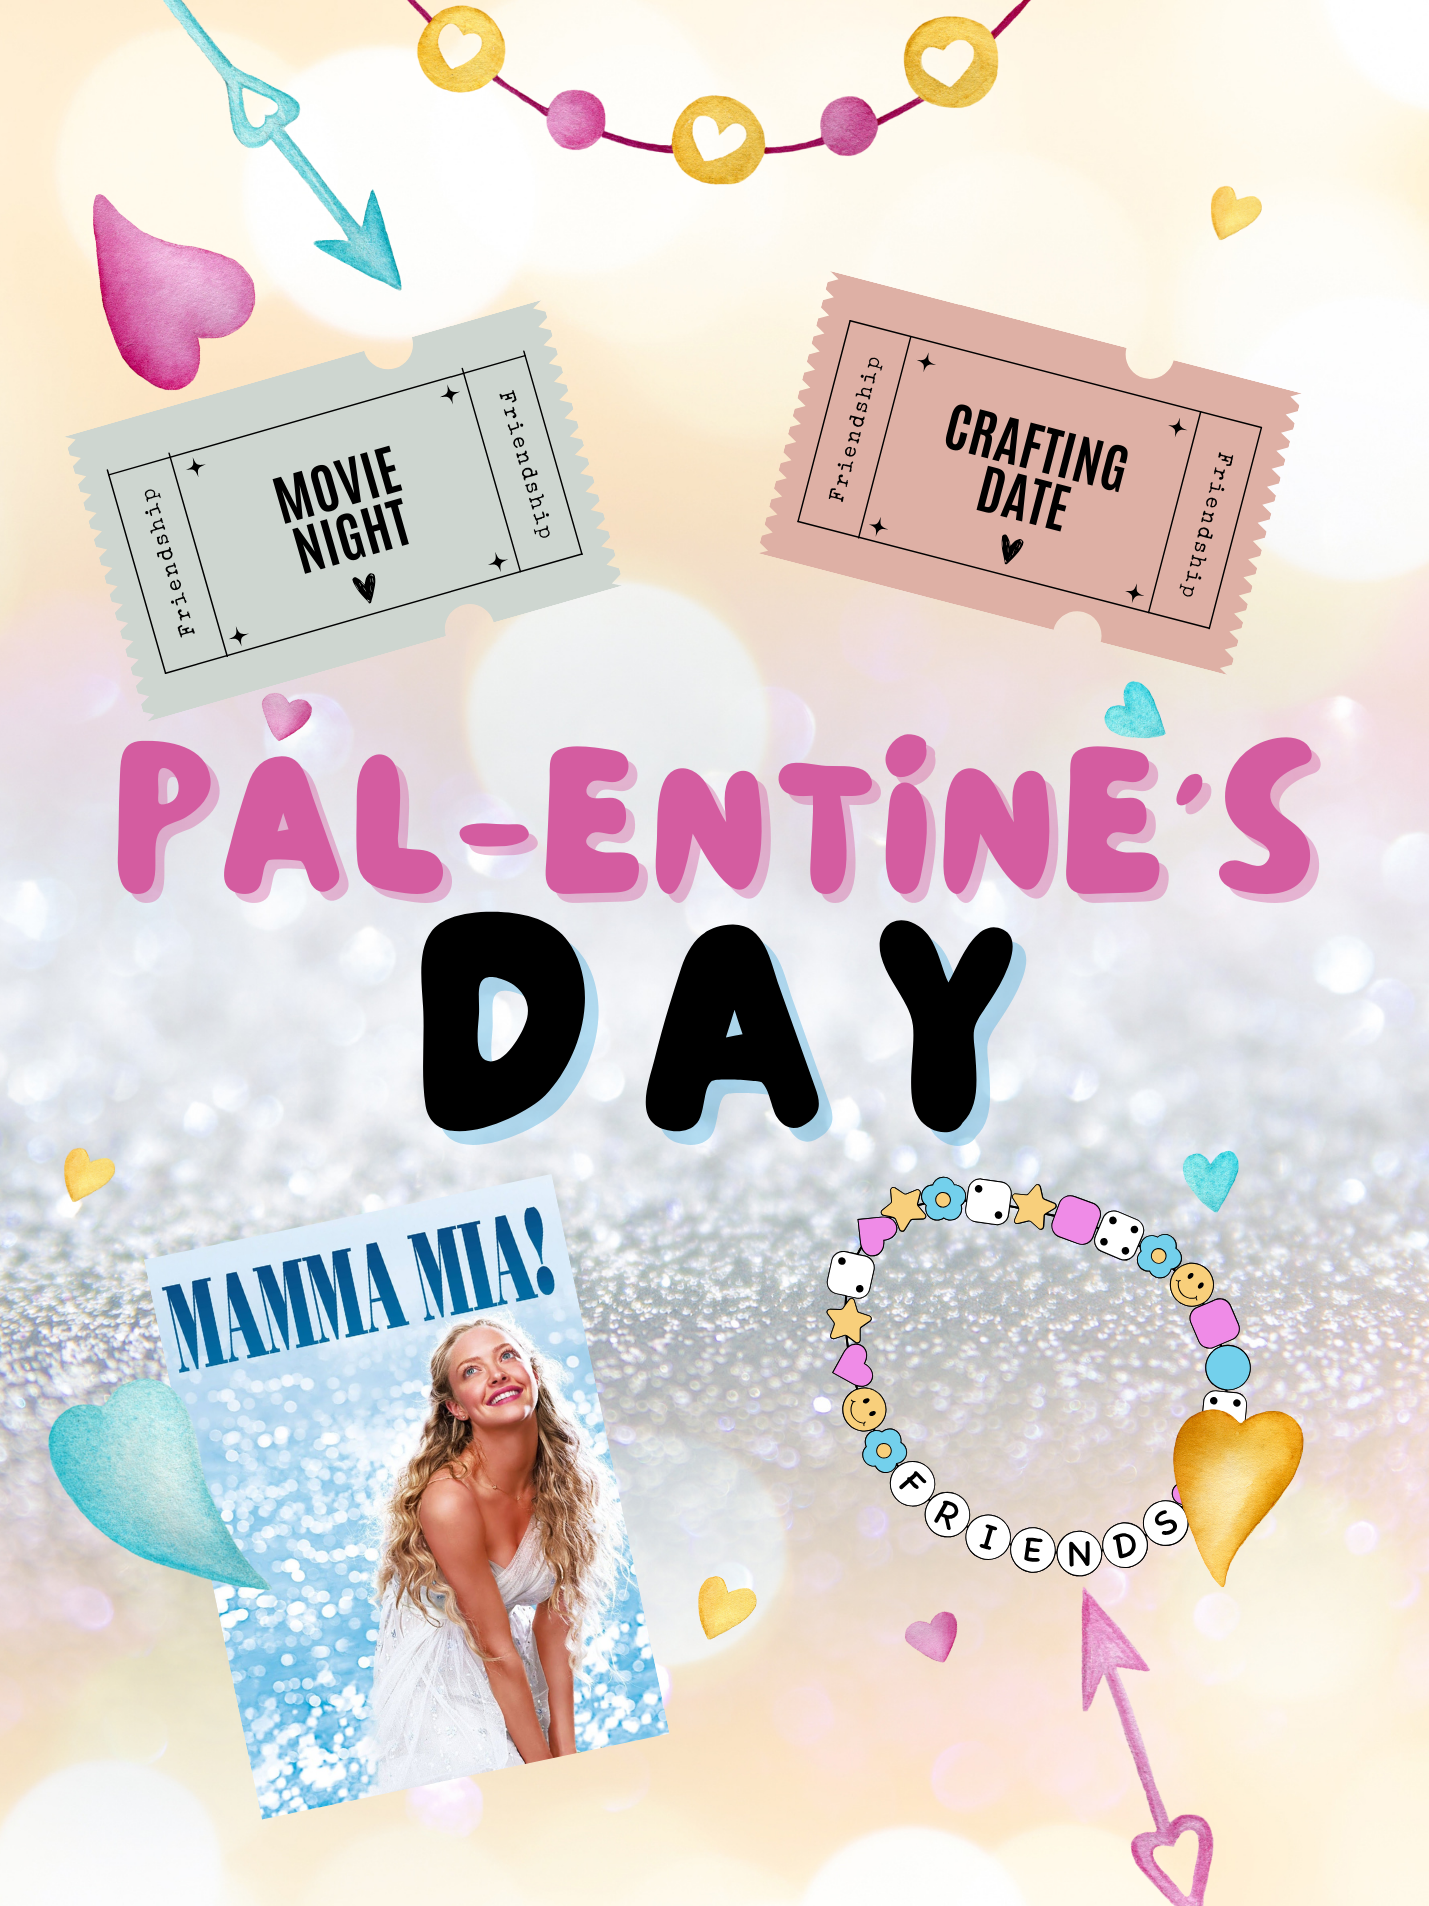 pal-entine's day